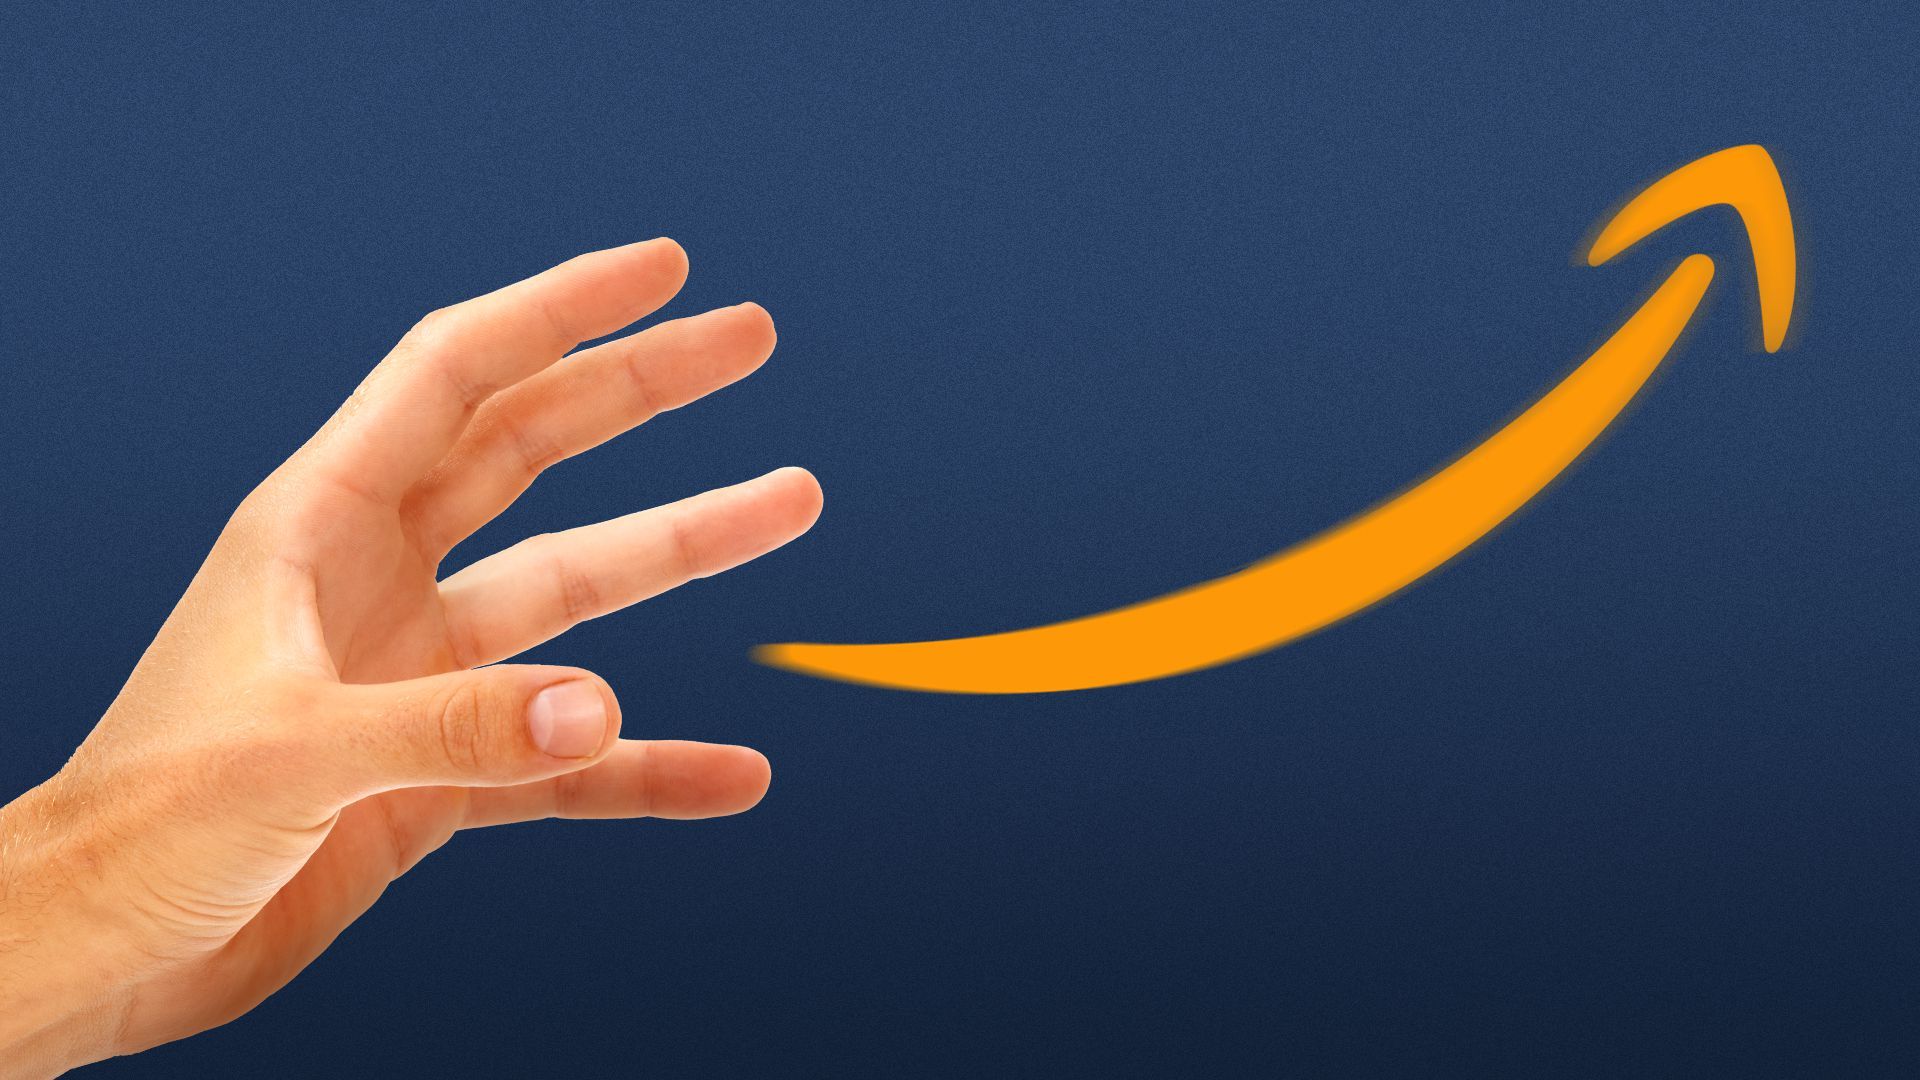 Illustration of a hand reaching for Amazon's logo.